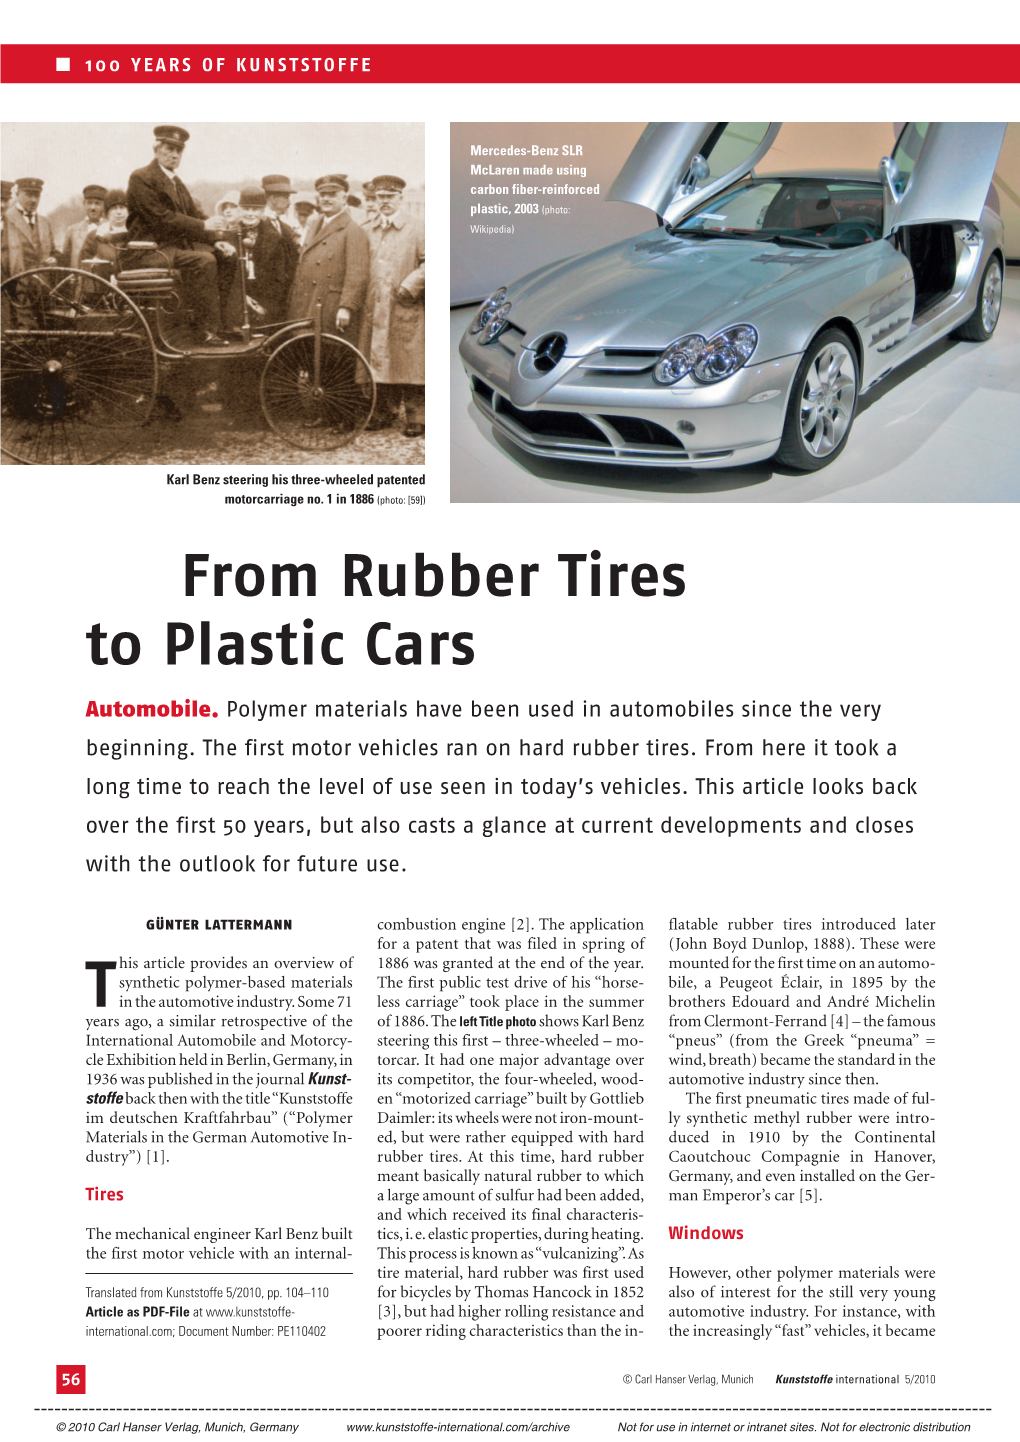 From Rubber Tires to Plastic Cars